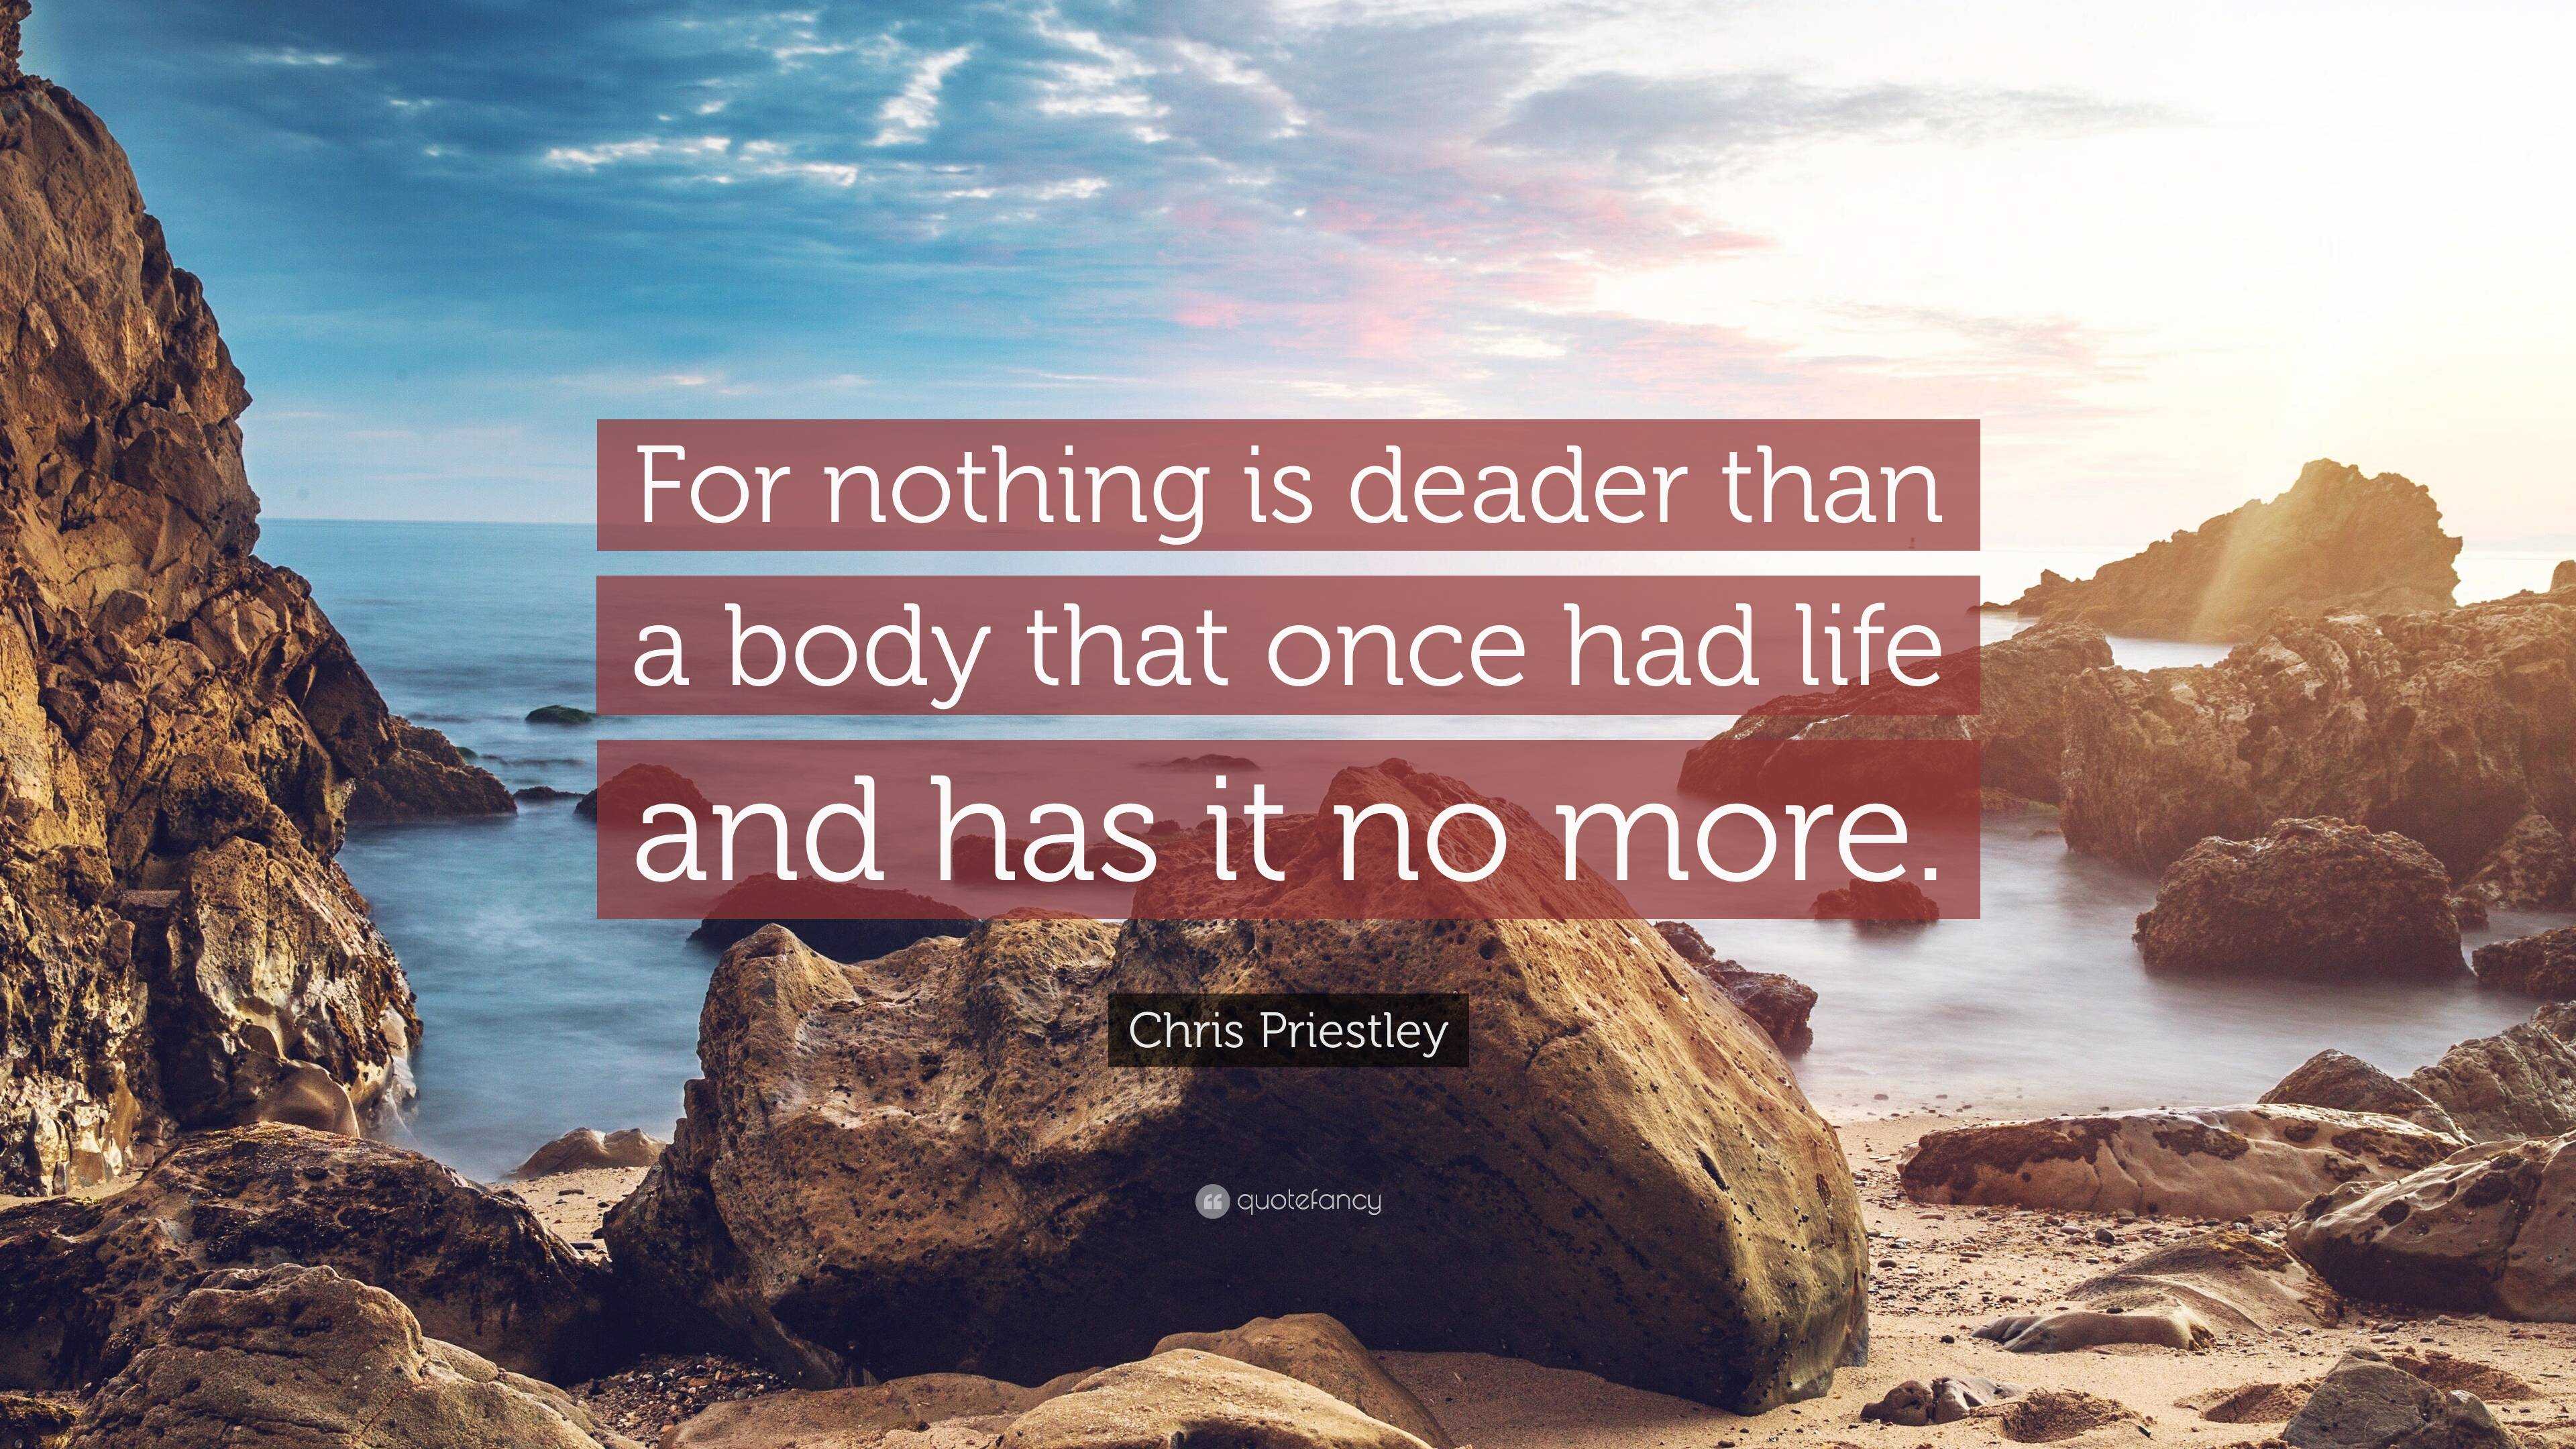 Chris Priestley Quote: “For nothing is deader than a body that once had ...